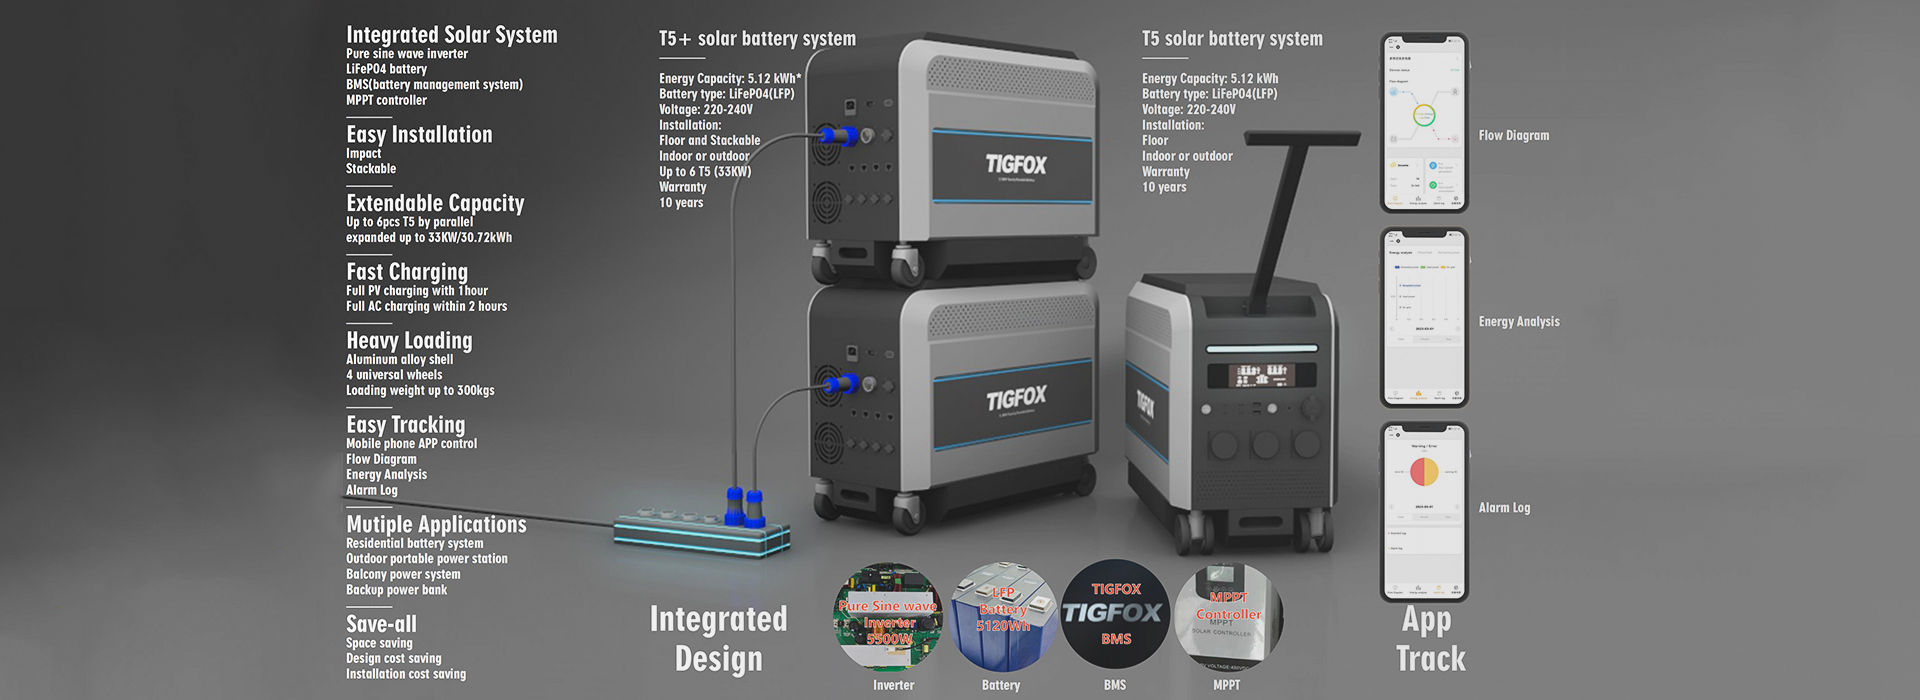 Energy Storage system for home and outdoor use